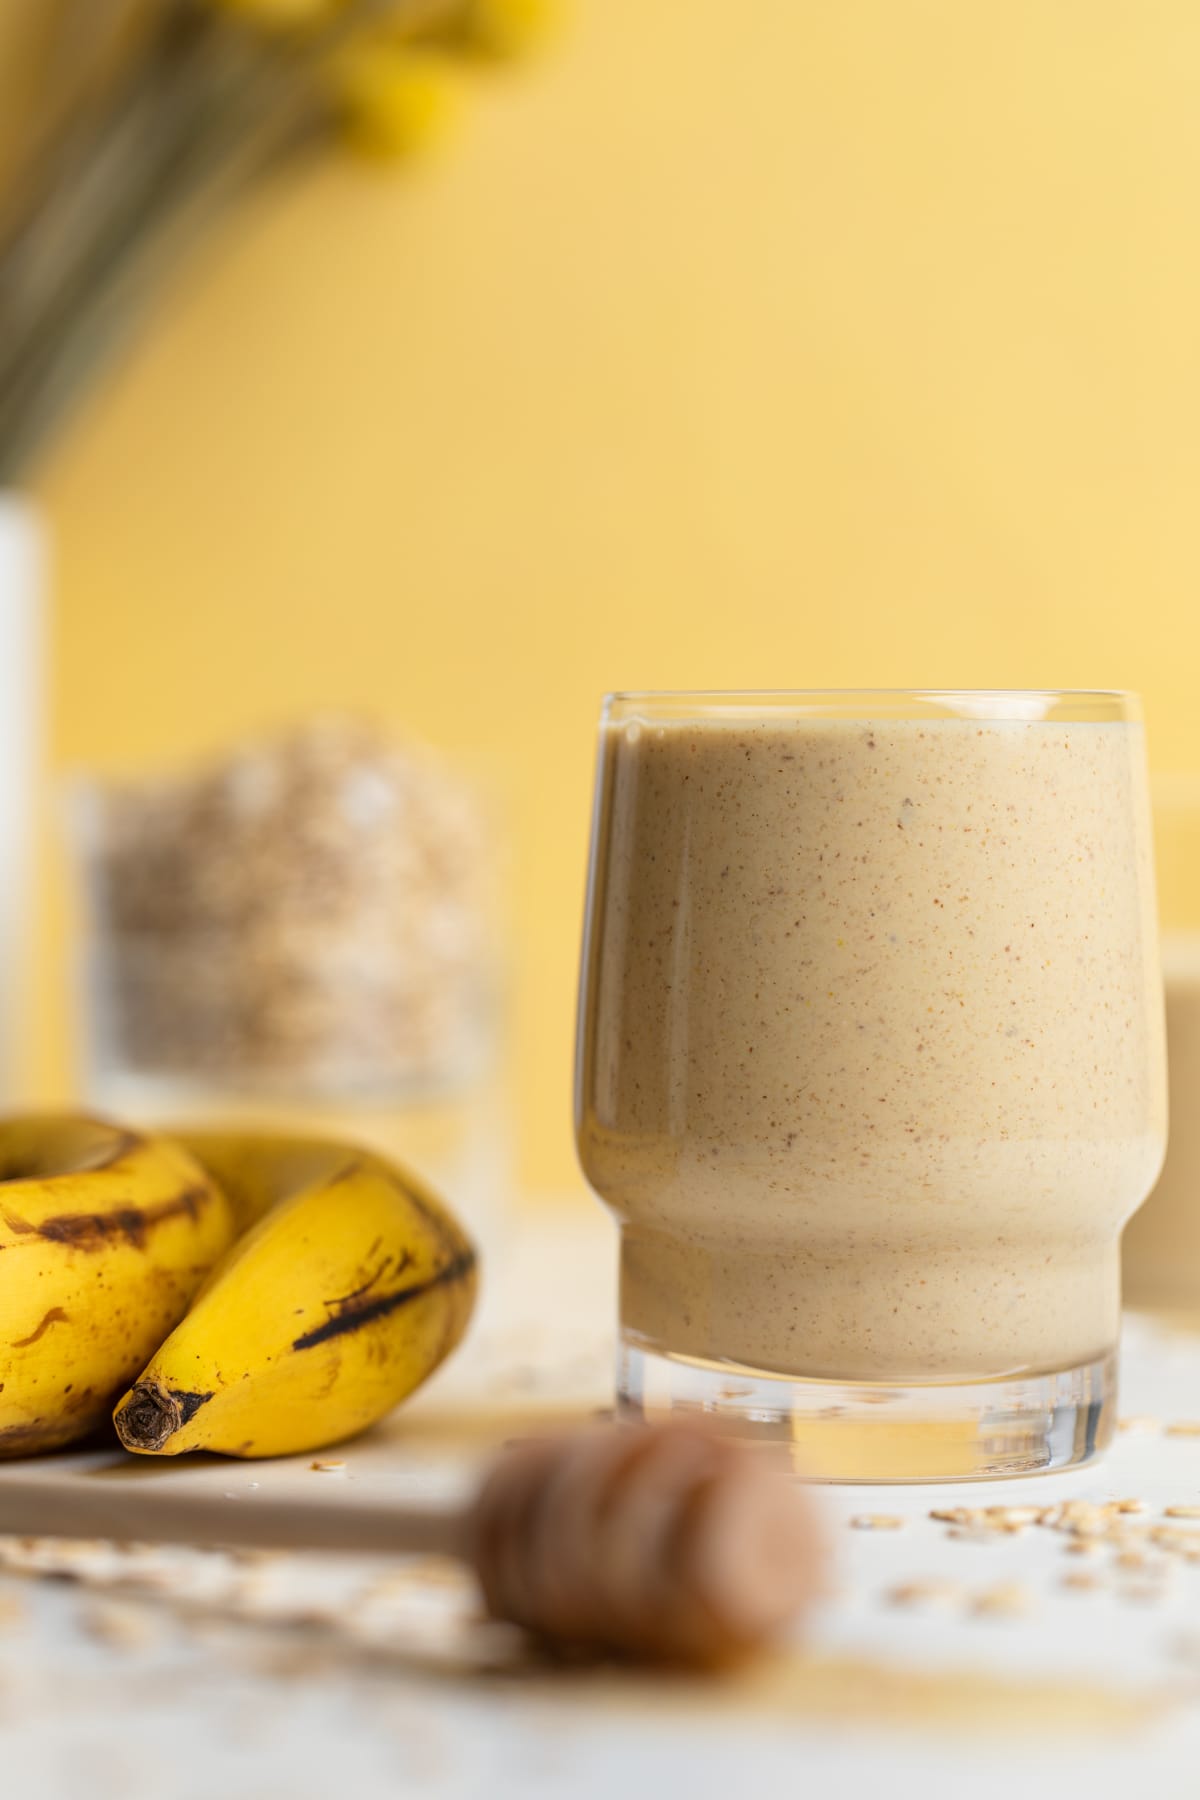 Easy Peanut Butter Banana Oats Smoothie